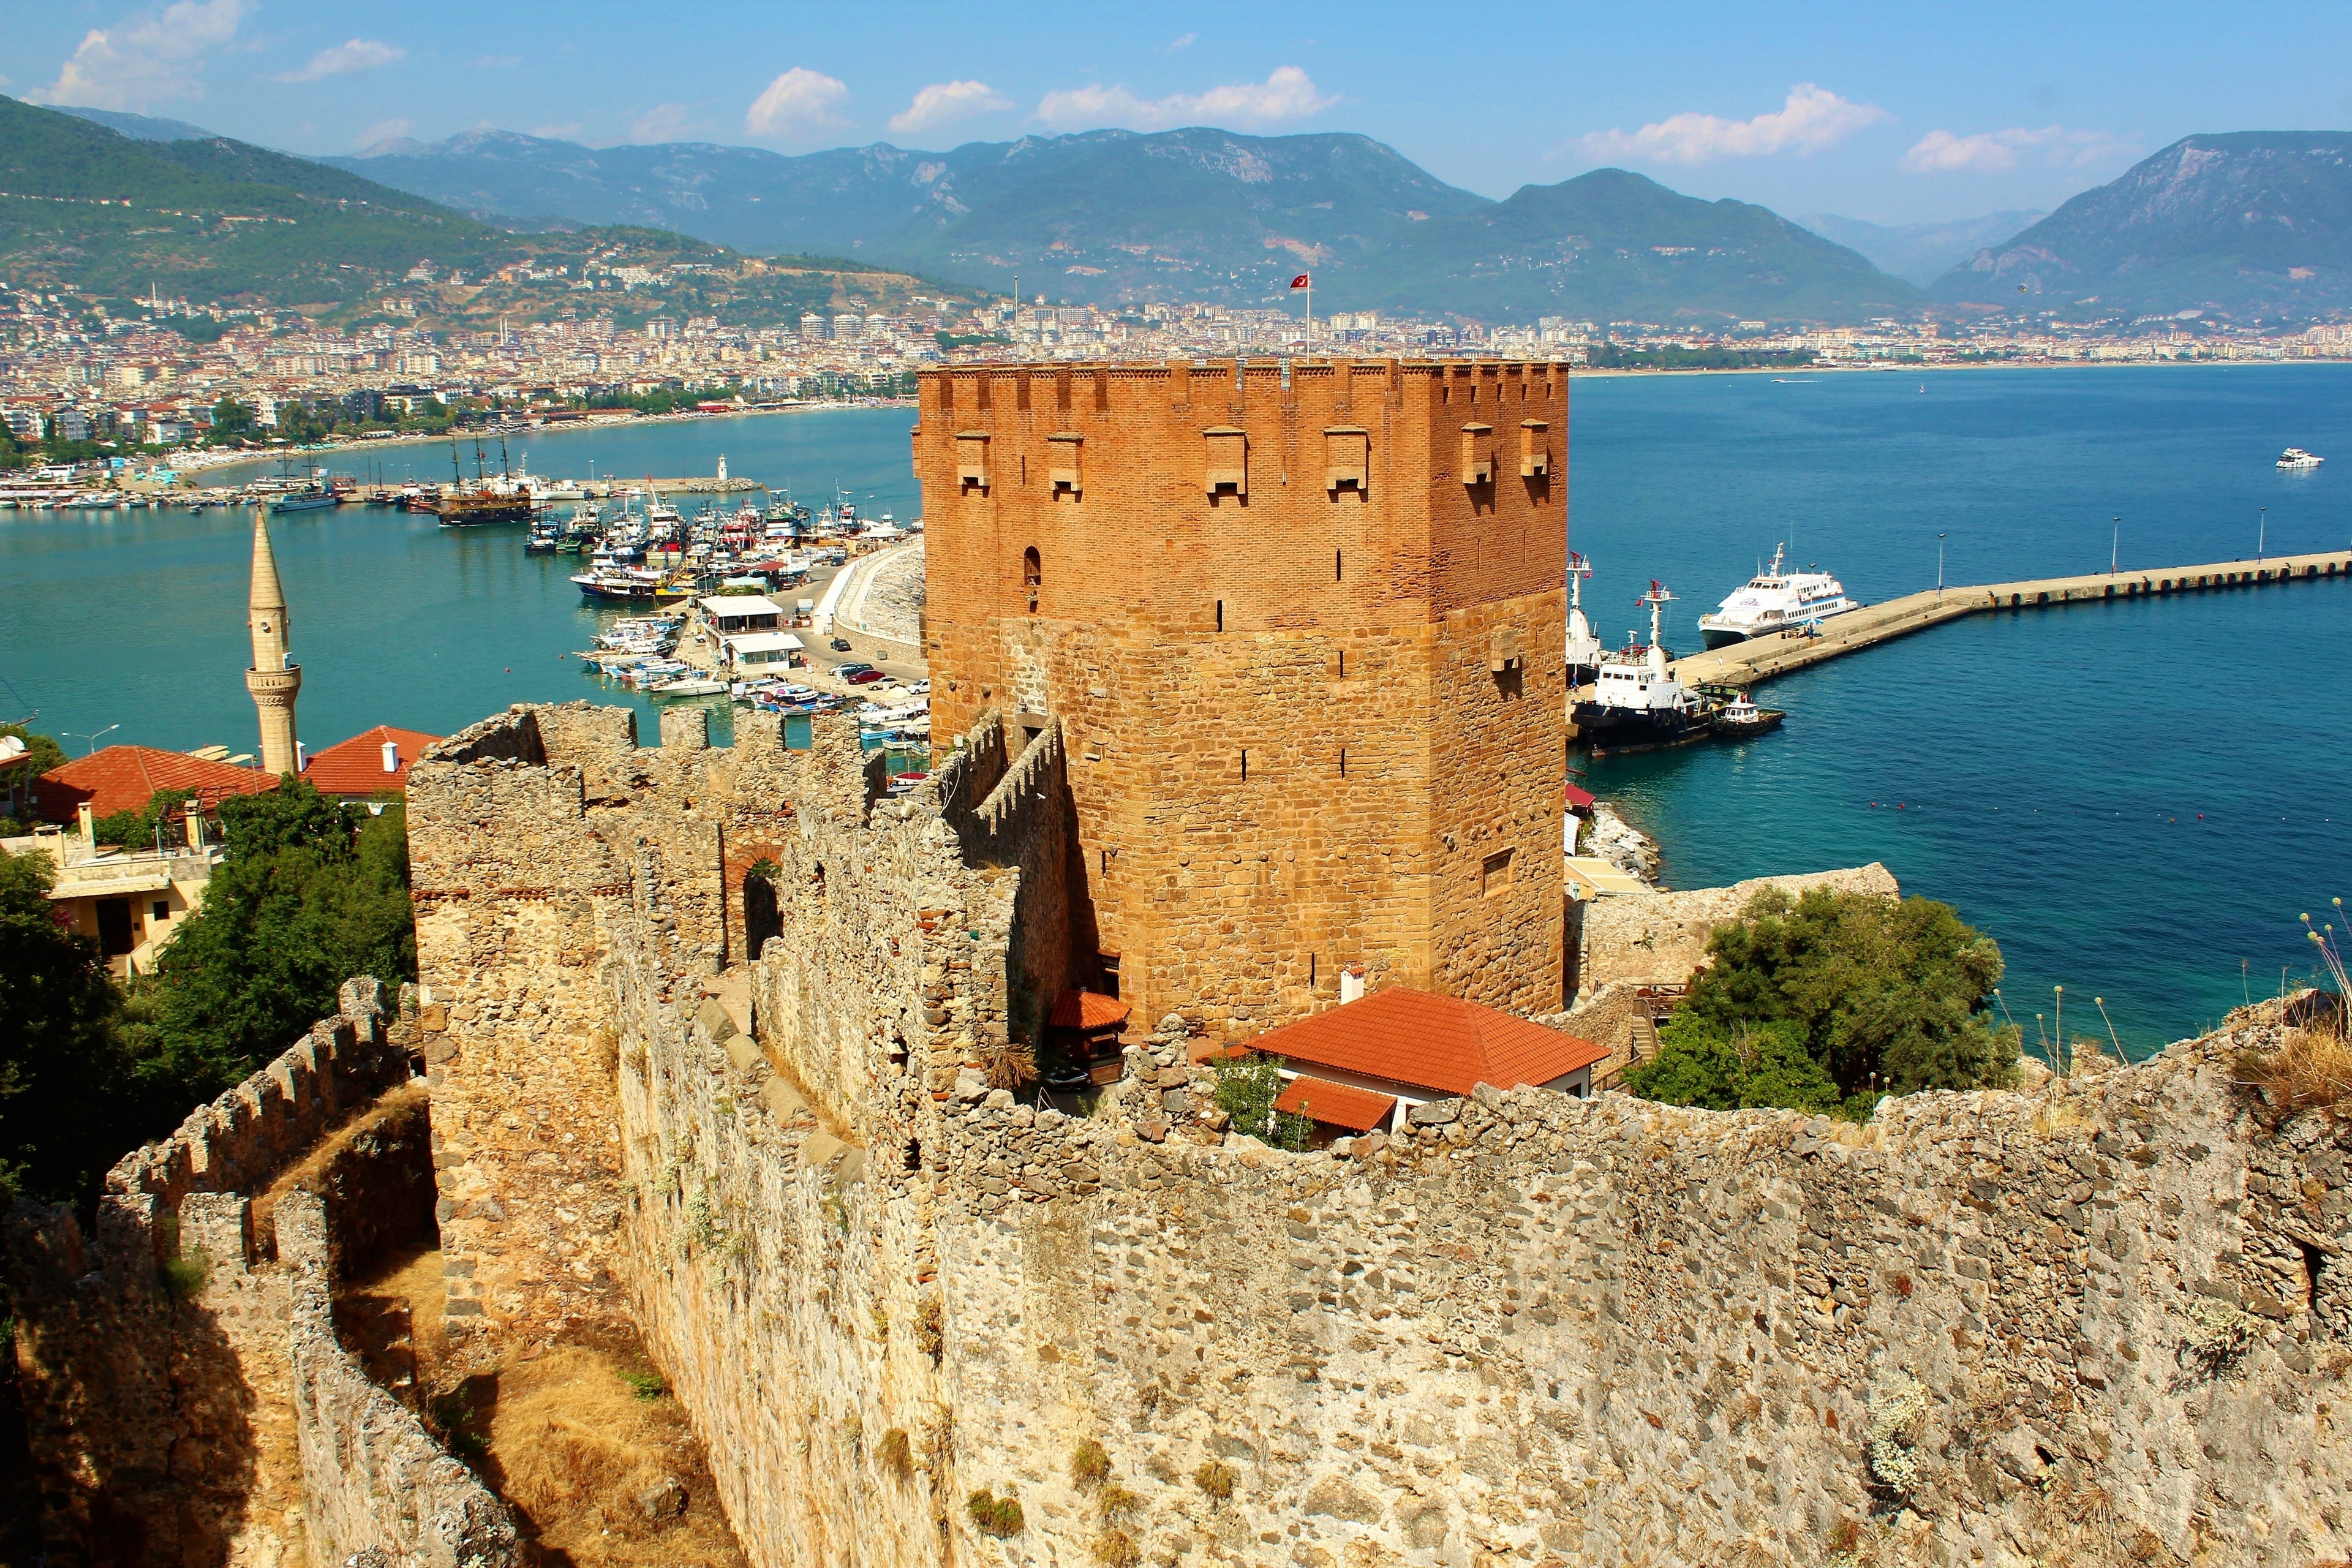 The Kızıl Kule (Red Tower) is a 13th-century tower in the Turkish city of Alanya. Part of Alanya Castle, the tower is considered to be the symbol of the city. And it's definitely one of the most impressive sights in Alanya :). One of my highlights of Summer 2018!

And more about the Red Tower: Being one of the unique examples of the medieval Mediterranean defense structure from 13th century, Red Tower was built by order of Alaeddin Keyqubad I, the Seljuk ruler, to Ebu Ali Reha el Kettani who was a master builder from Aleppo in order to protect harbor, shipyard and Alanya Castle against attacks from the sea. And the castle was built on the remnants of earlier Byzantine era and Roman era fortifications.